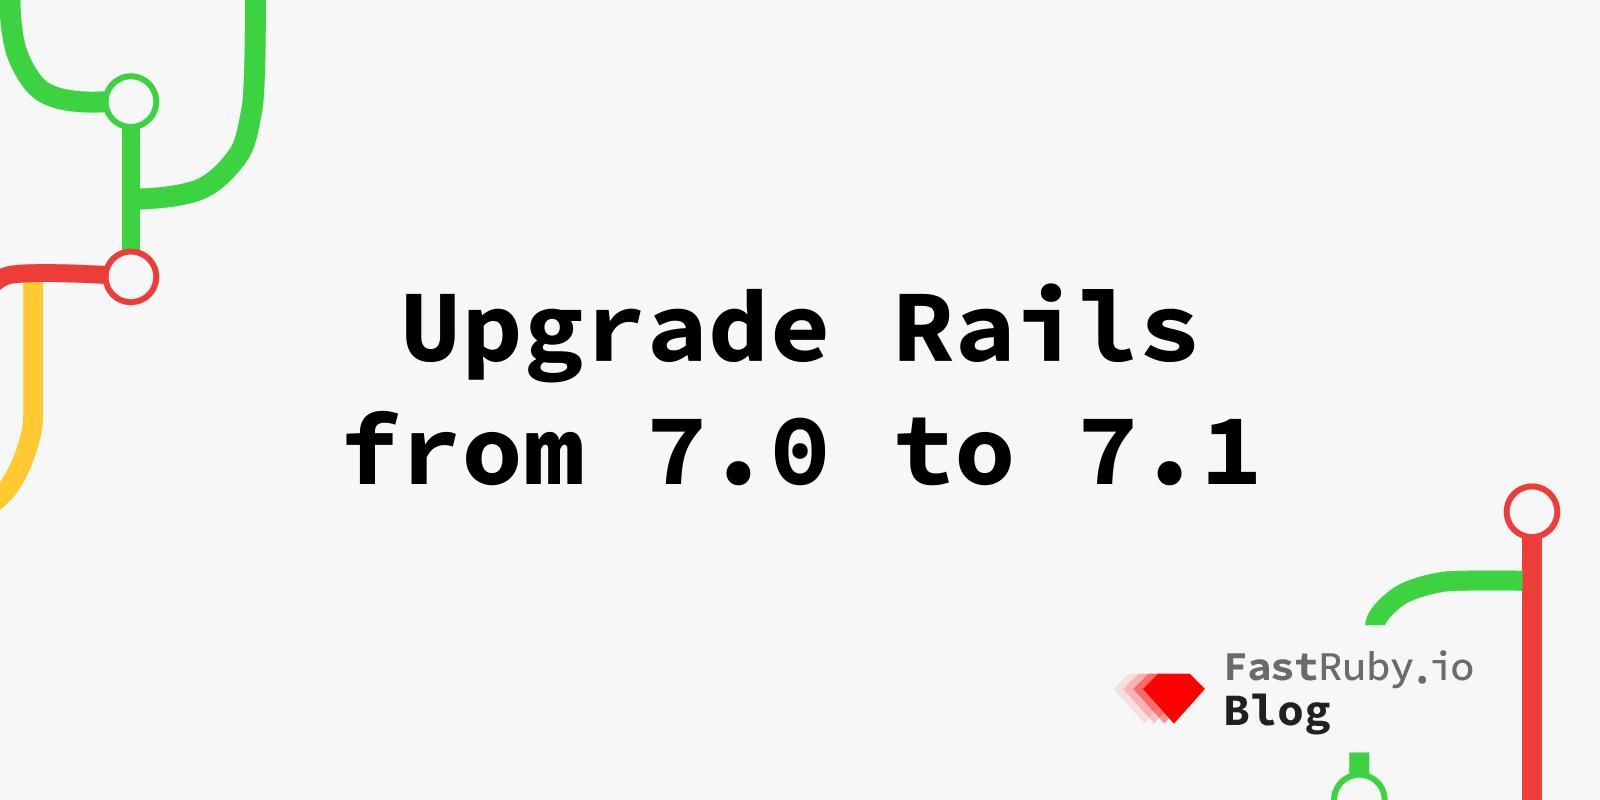 Upgrade Rails from 7.0 to 7.1